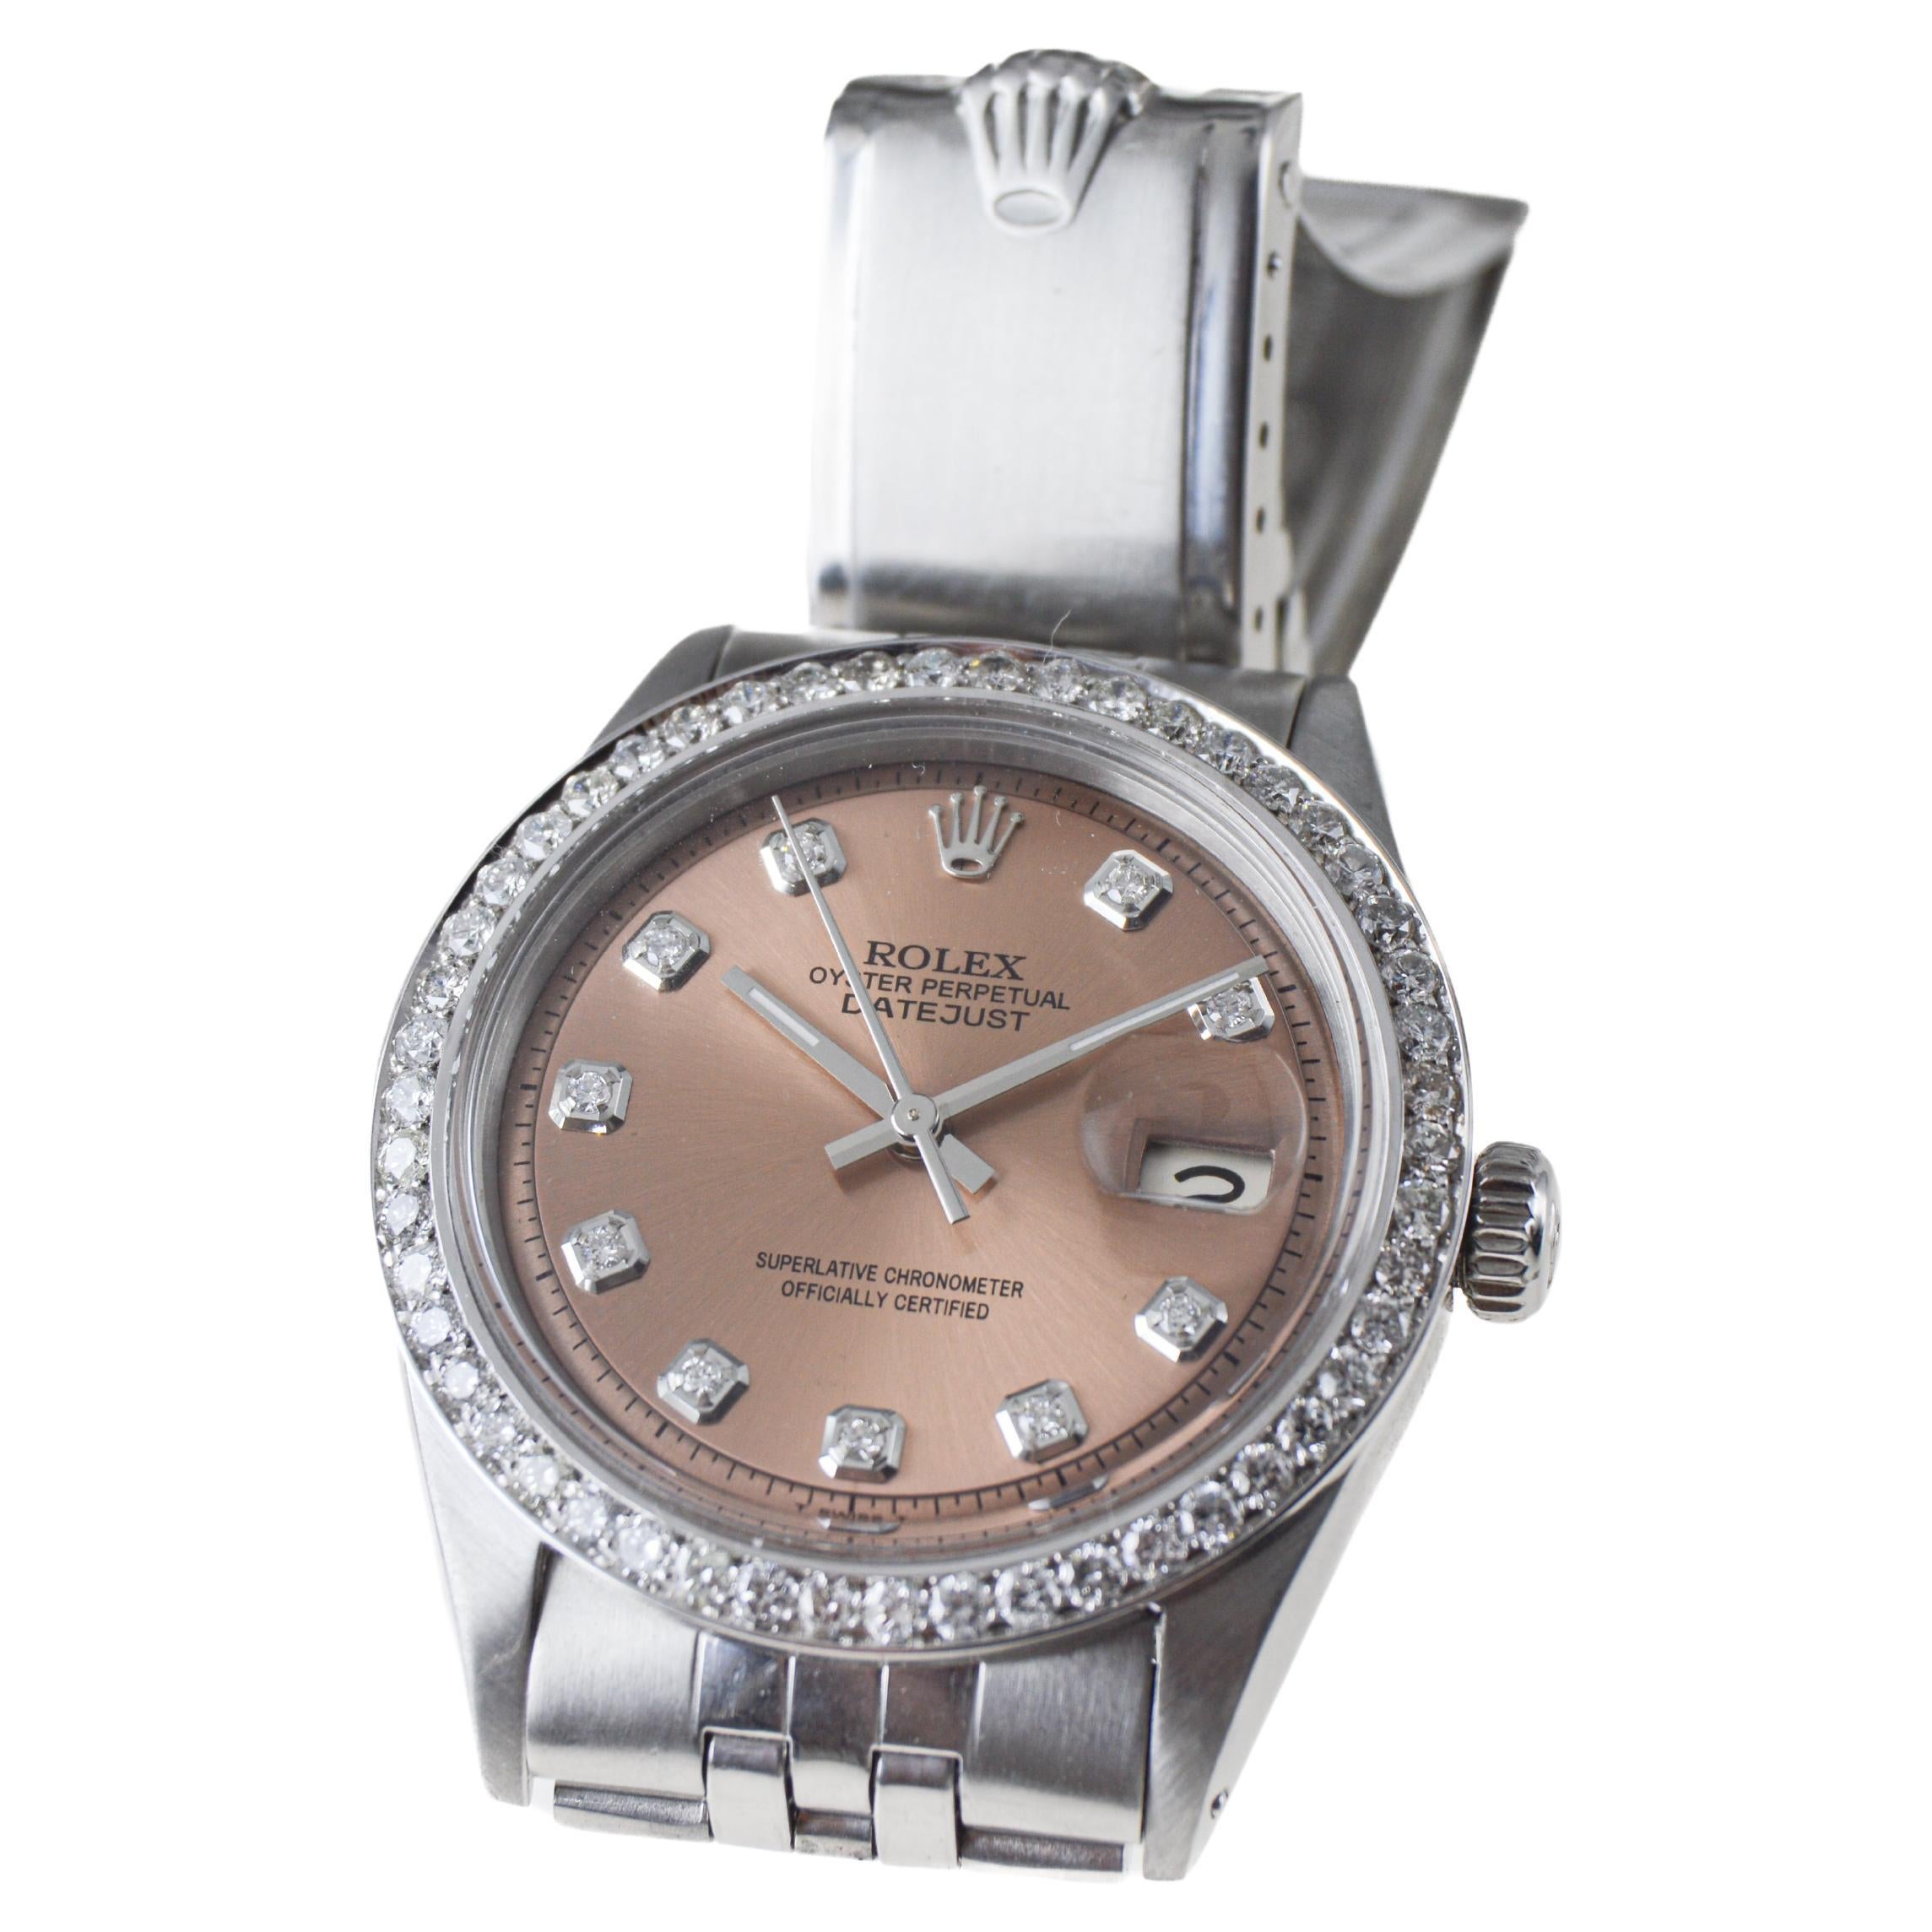 Rolex Stainless Steel Datejust Custom Finished Dial Diamond Bezel, circa 1960's For Sale 2